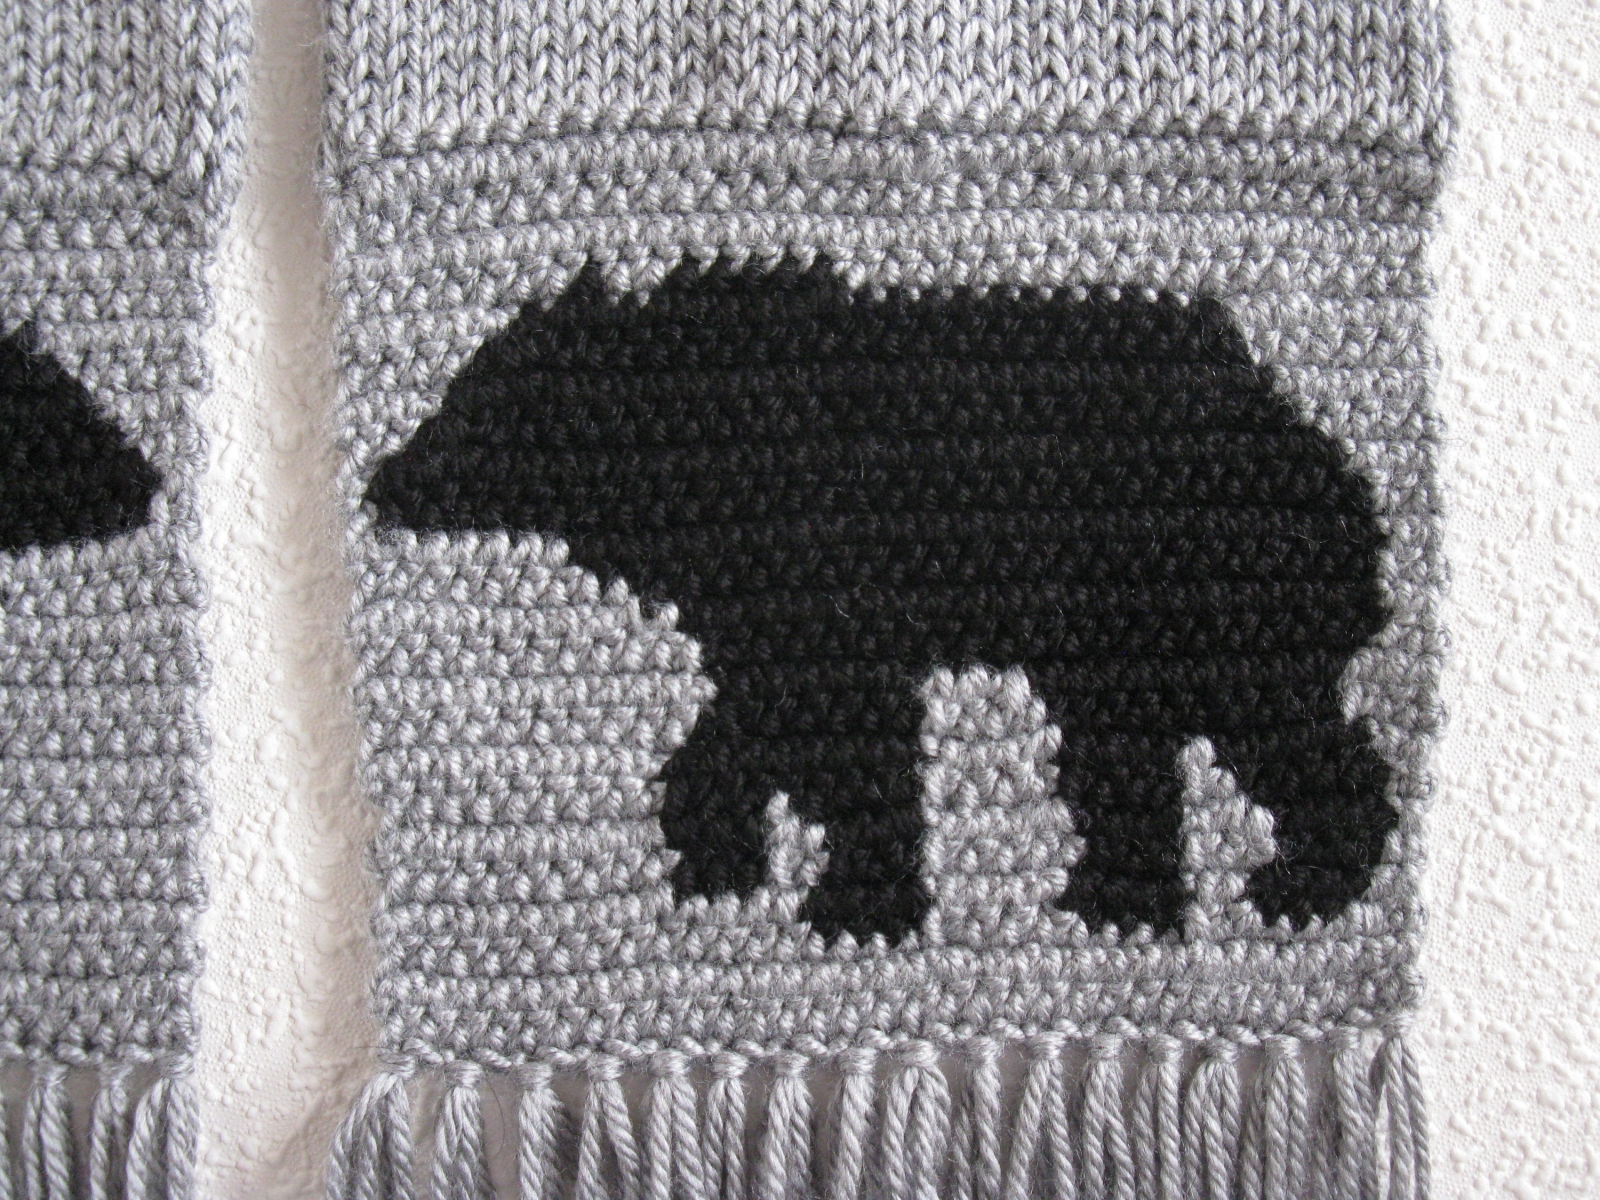 Knit Bear Scarf. Lang, gray knitted and crochet scarf with